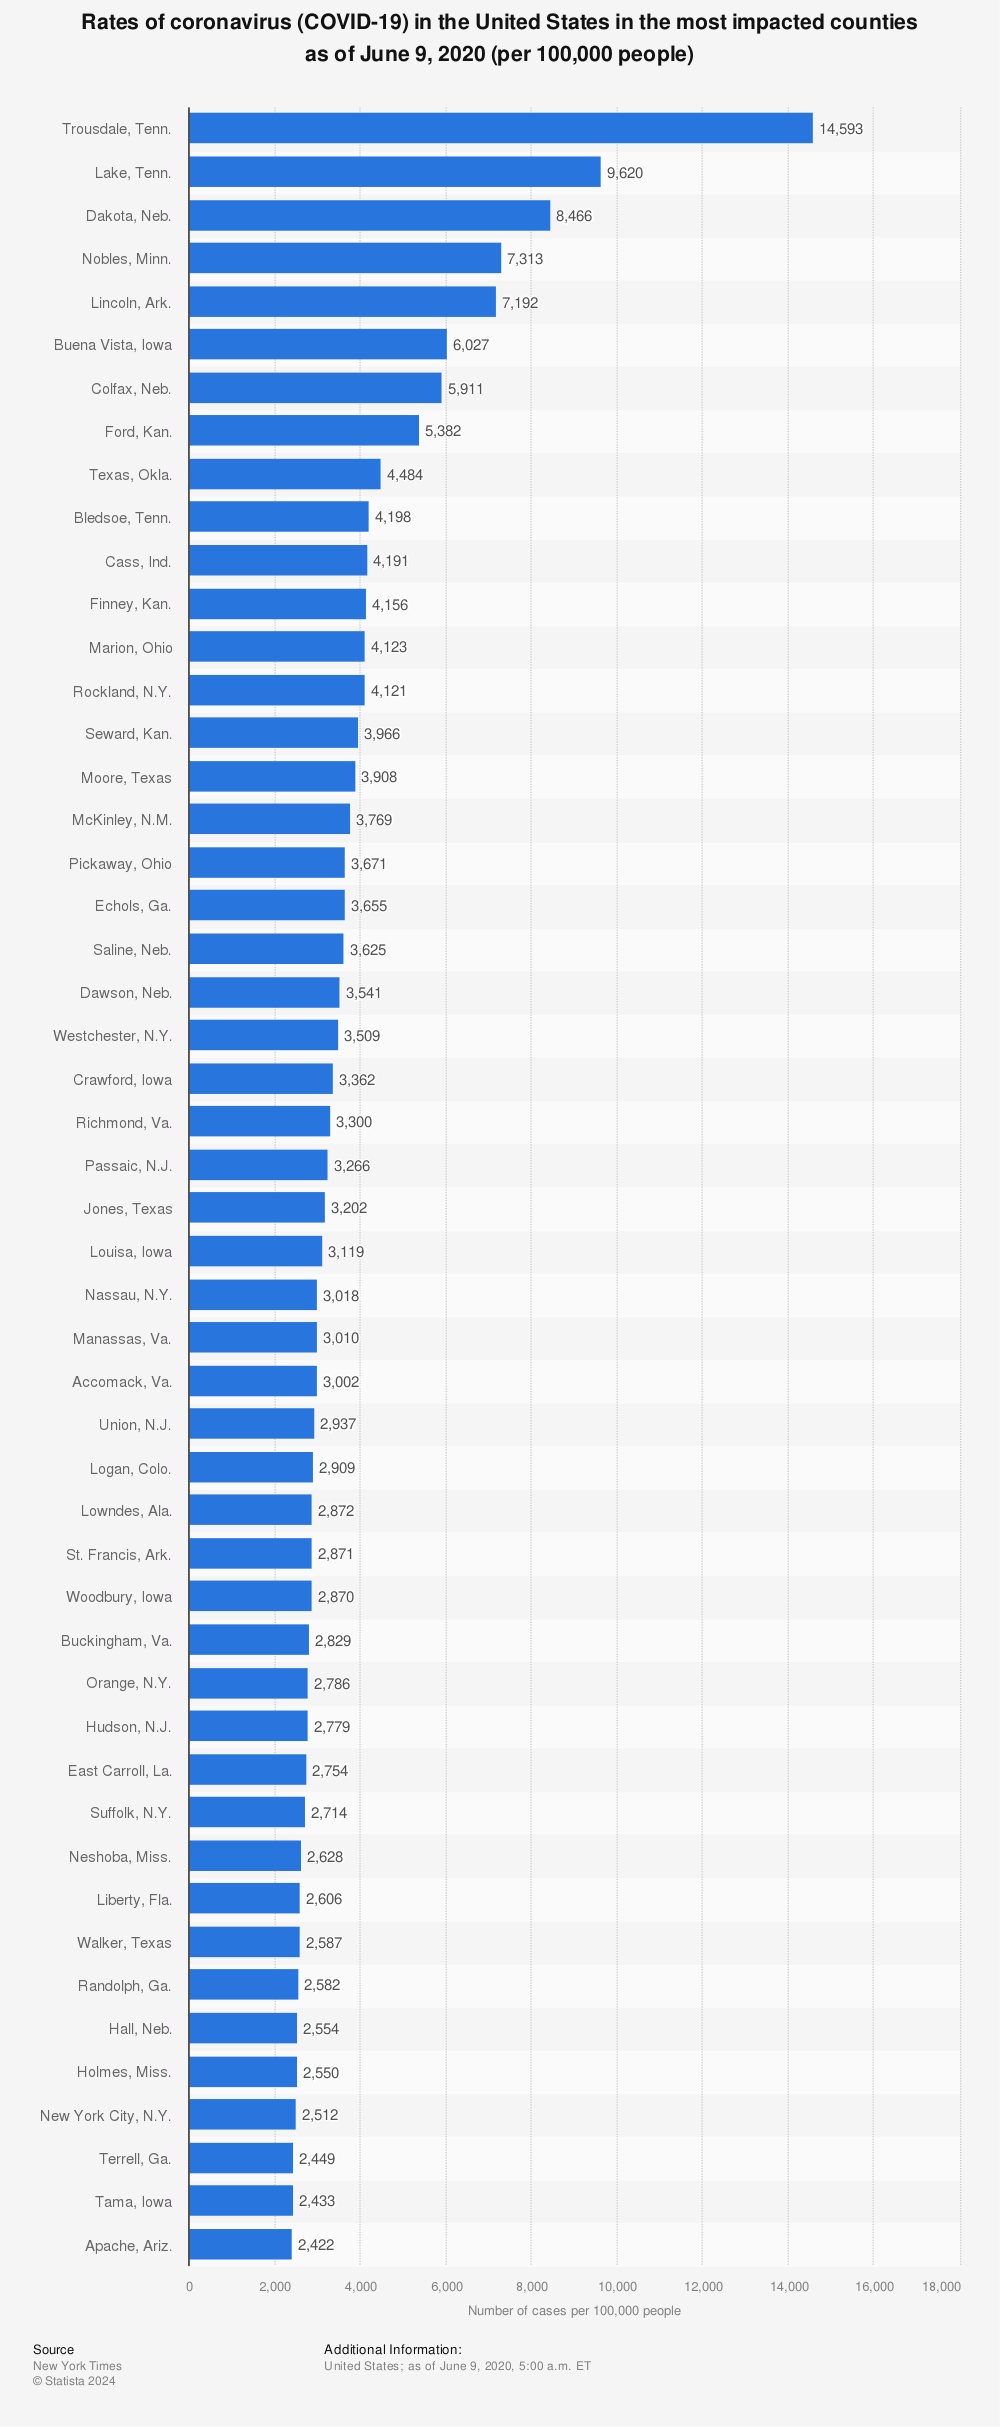 Statistic: Rates of coronavirus (COVID-19) in the United States in the most impacted counties as of June 9, 2020 (per 100,000 people) | Statista